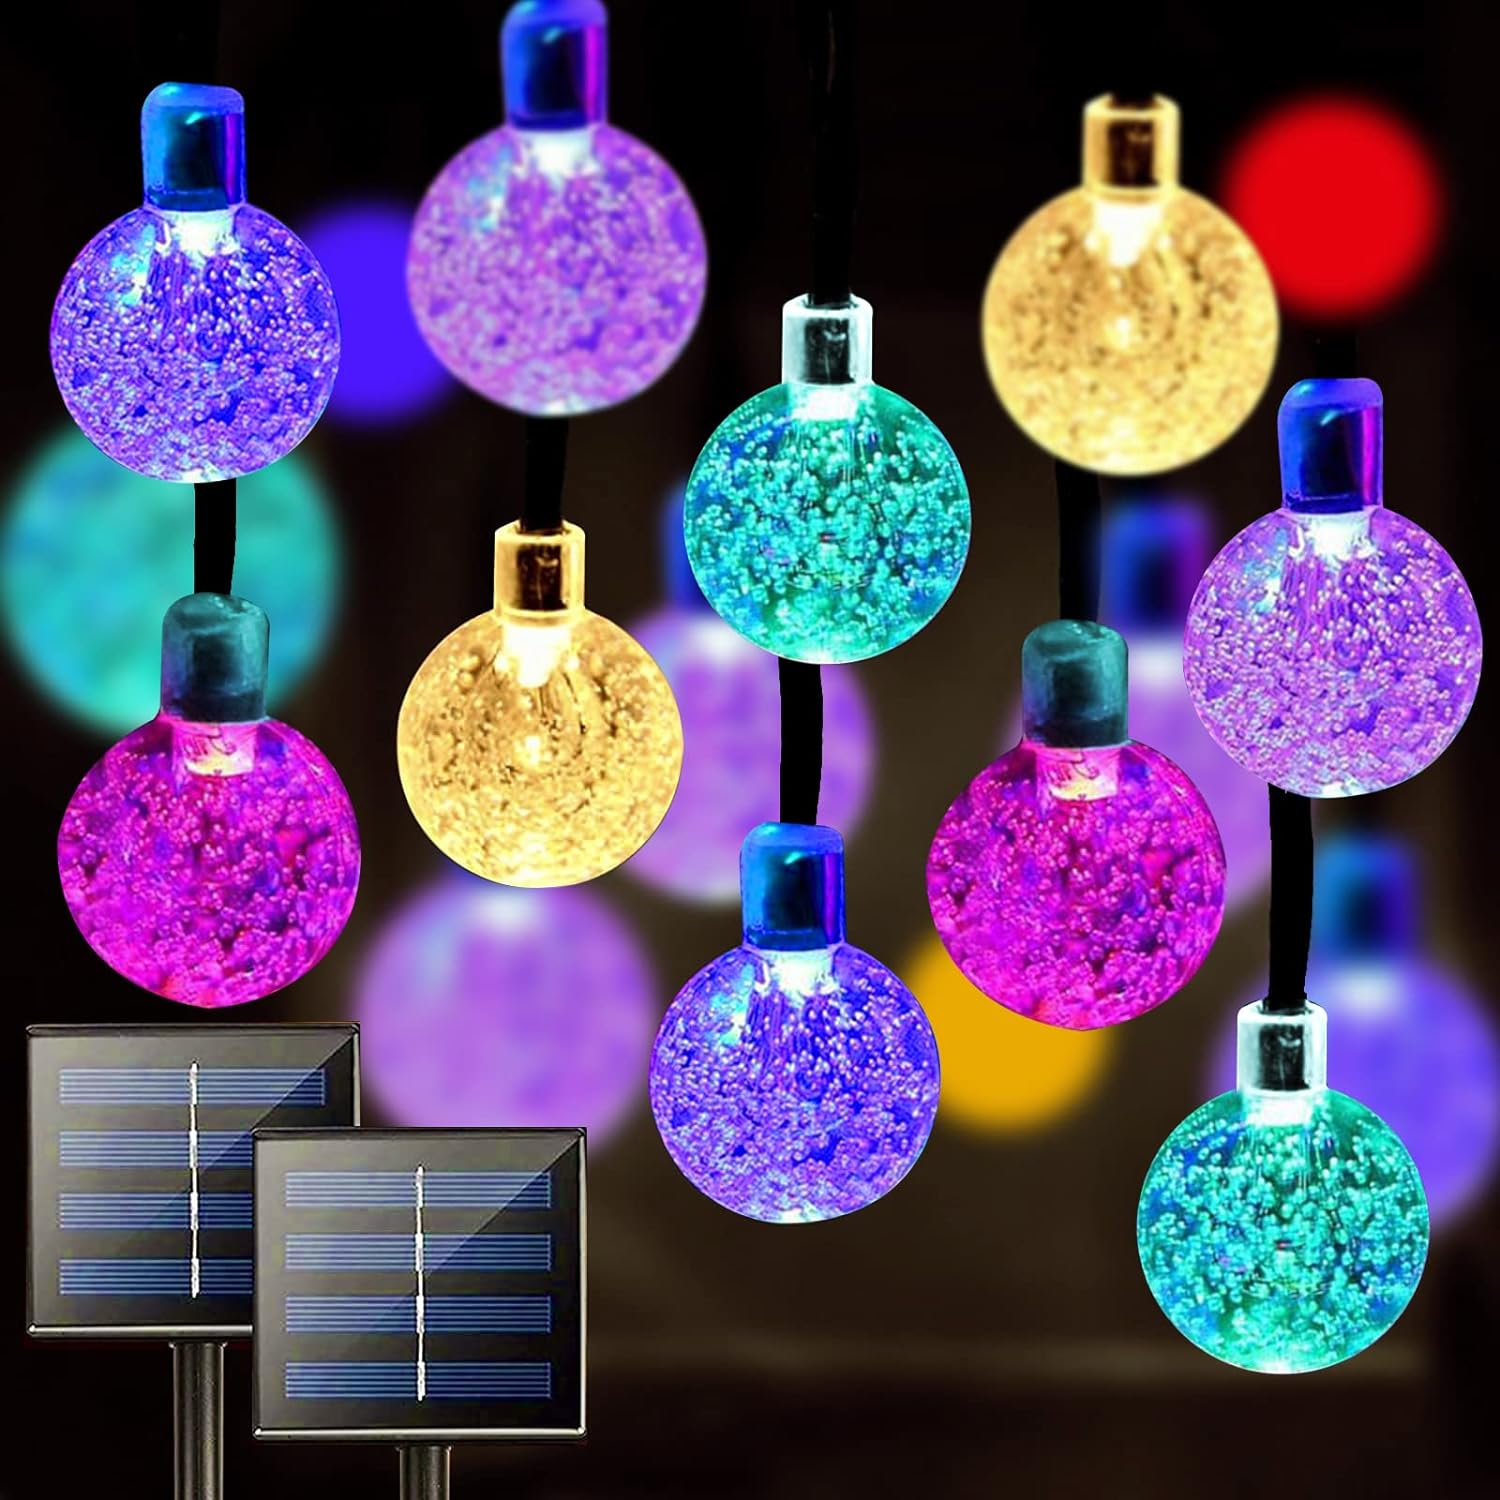 Solar String Lights Outdoor 2 Pack 200 Led 80FT Multi-Color Crystal Globe Lights with 8 Lighting Modes, Waterproof Solar Powered Patio Lights for Garden Yard Porch Wedding Party Decoration